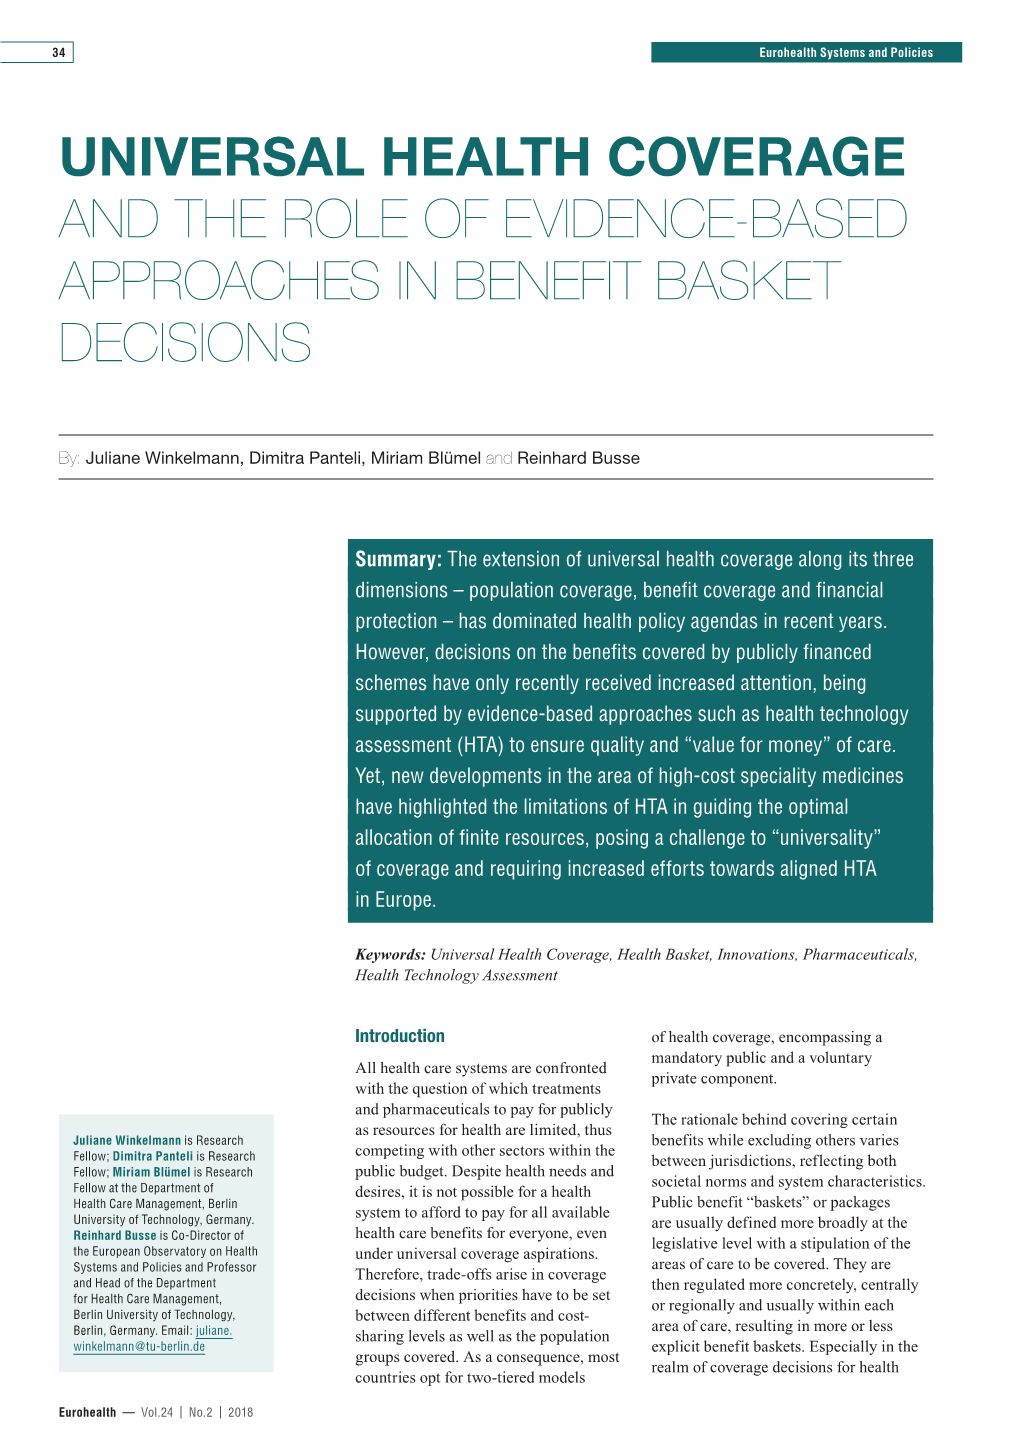 Universal Health Coverage and the Role of Evidence-Based Approaches in Benefit Basket Decisions